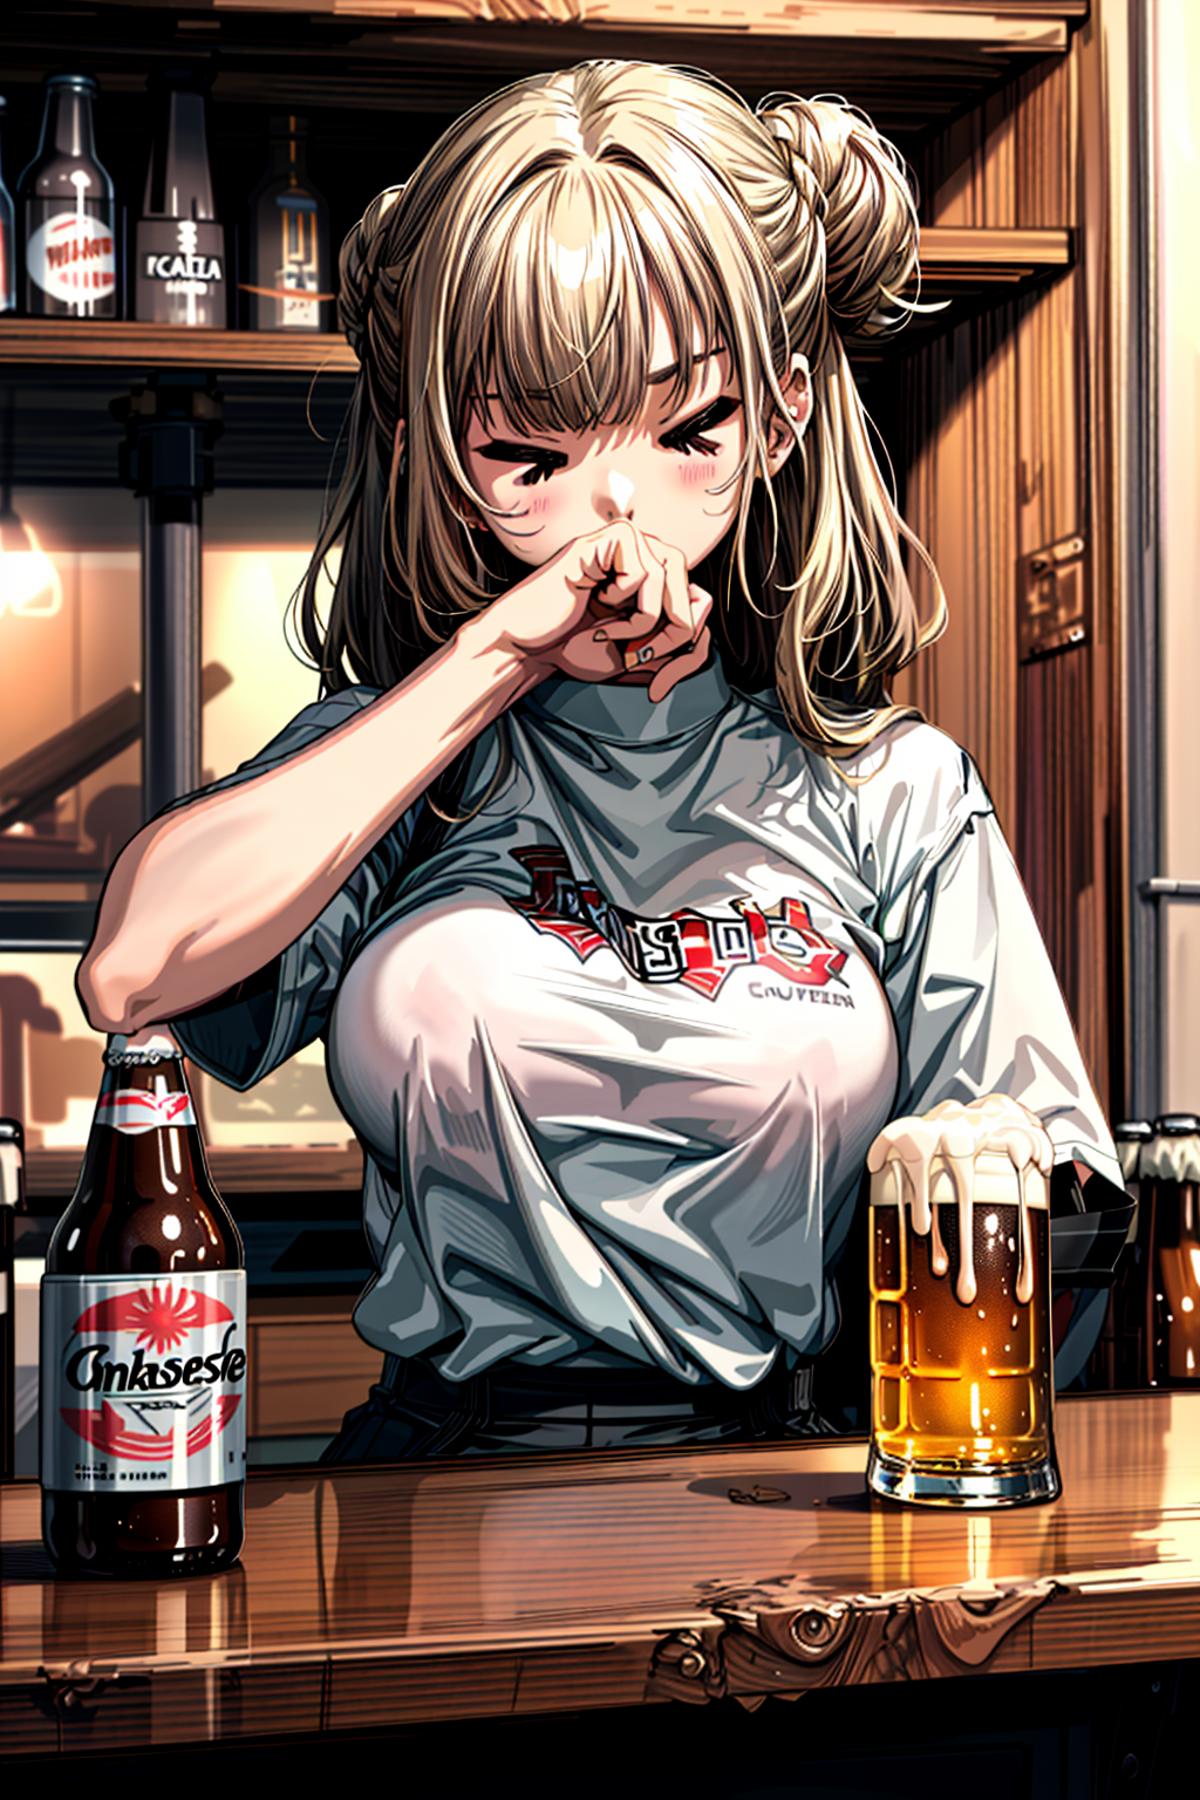 Anime girl holding a beer and looking at her phone.